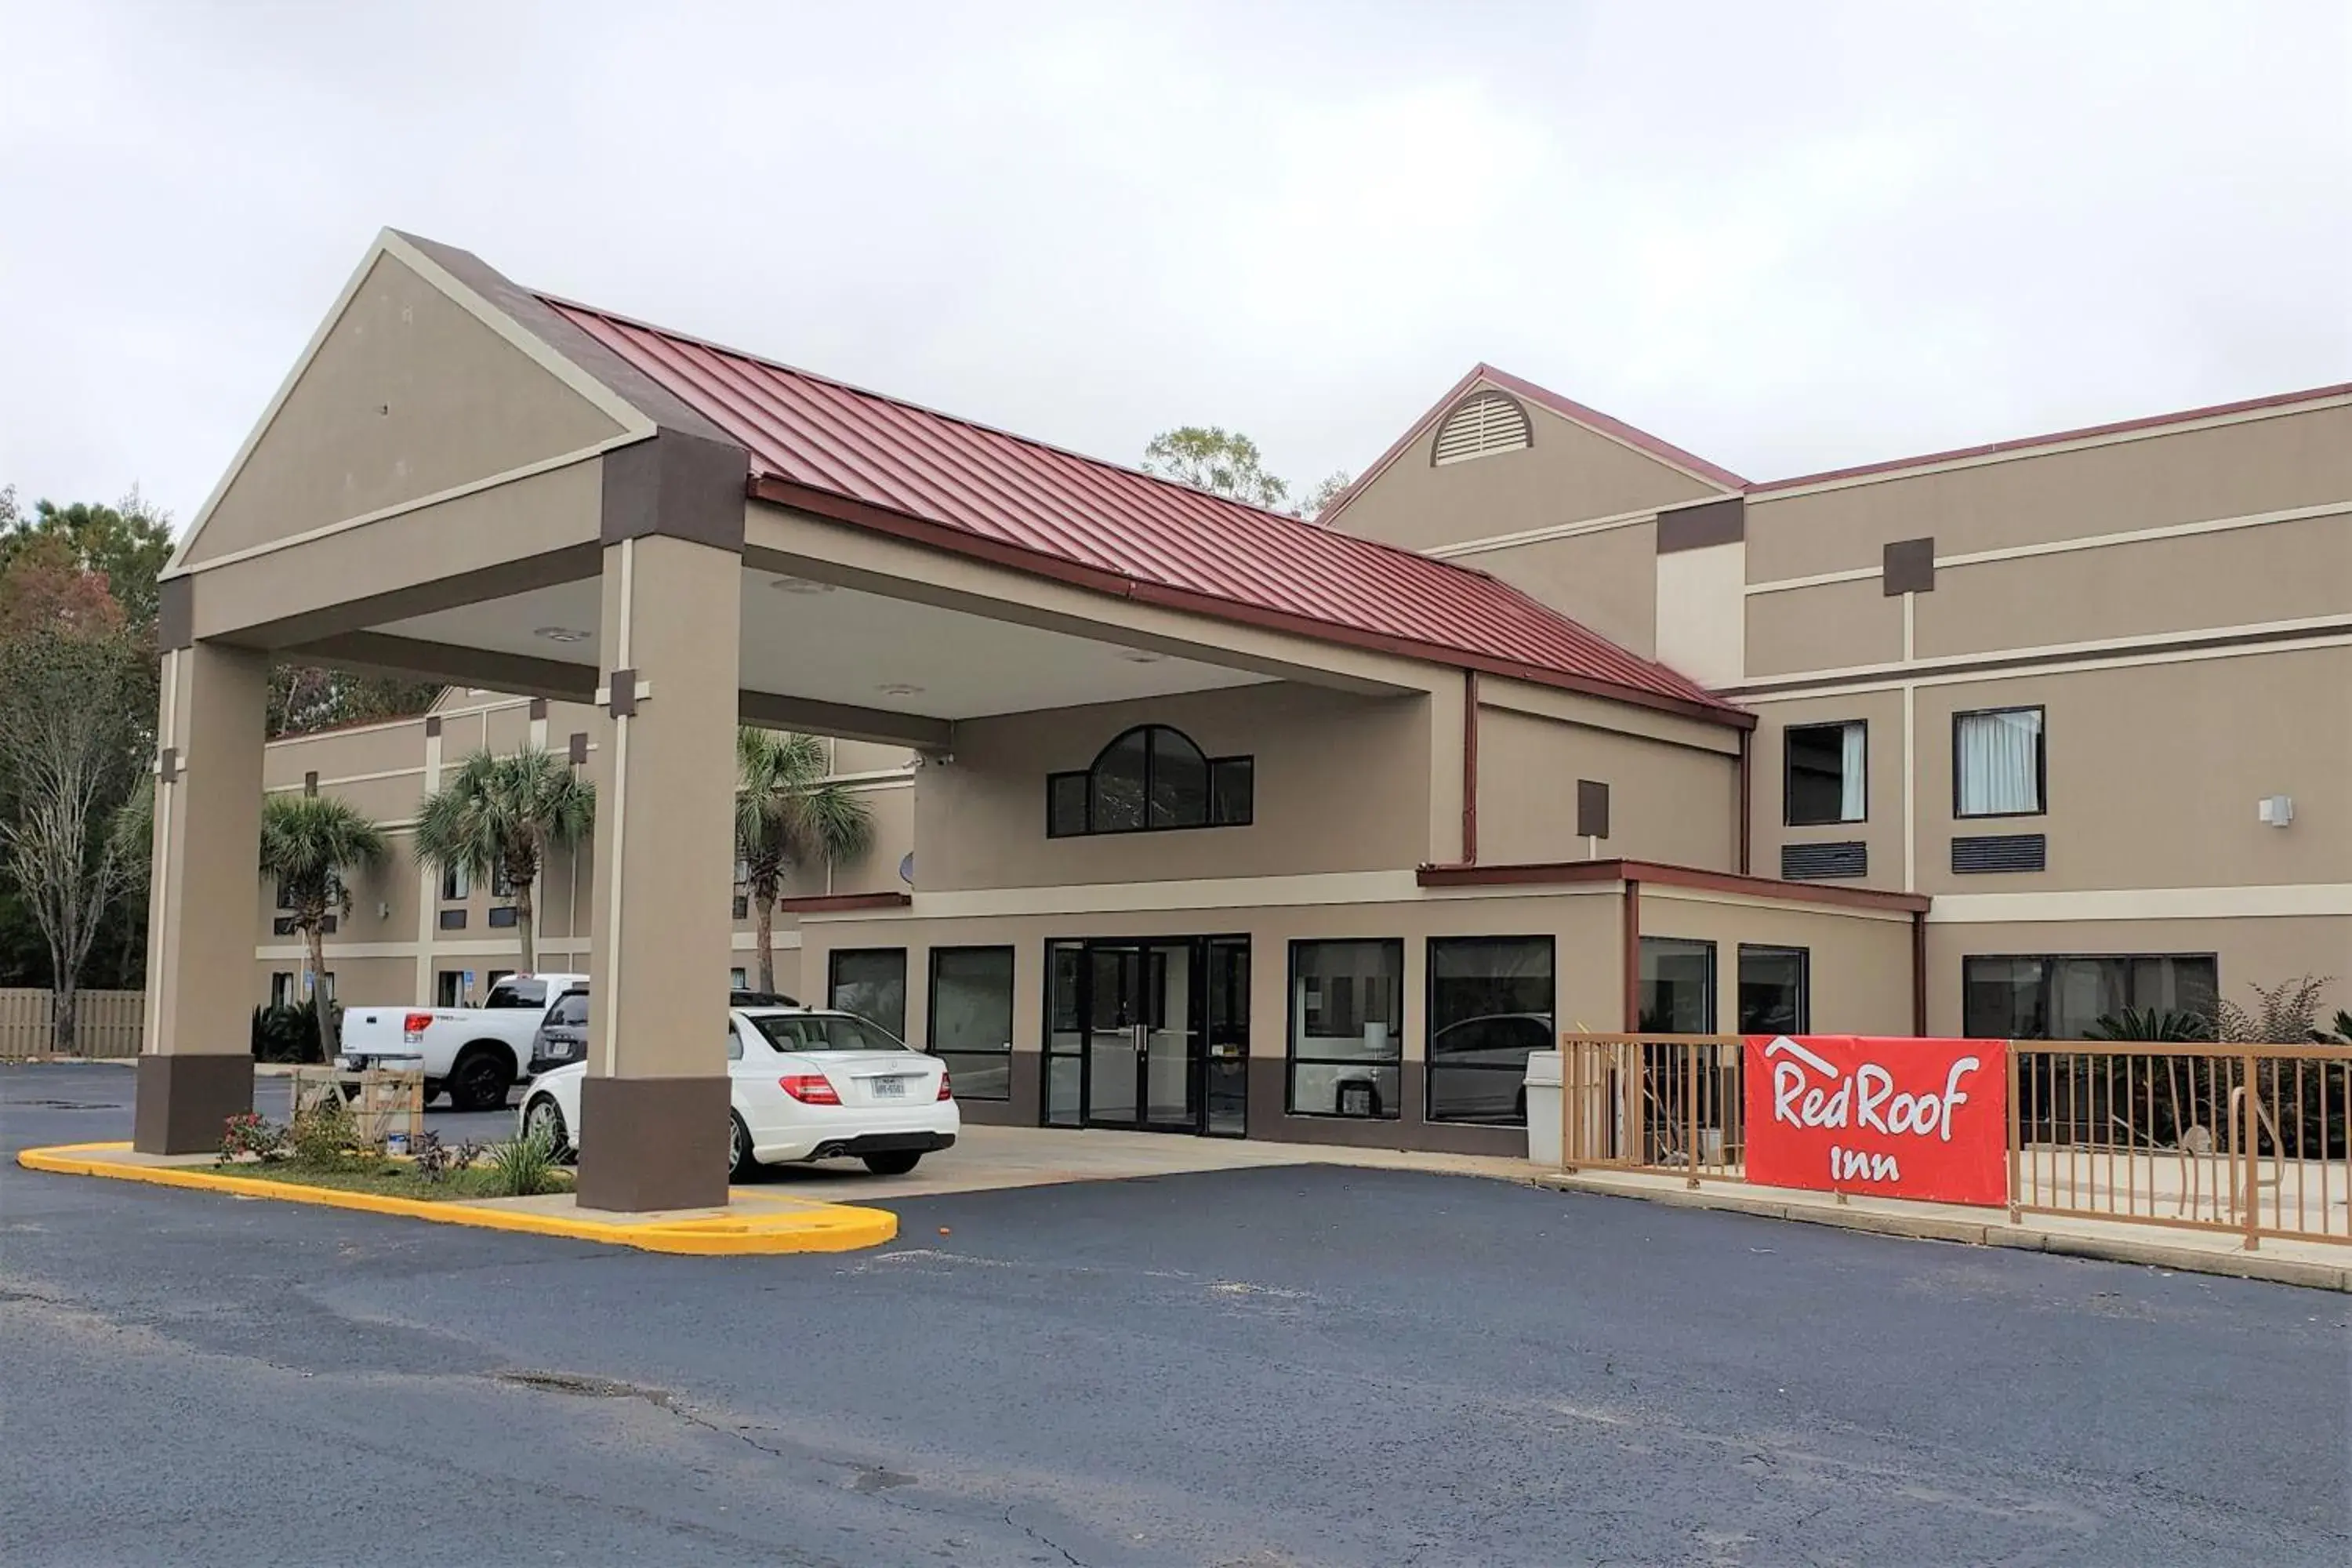 Property Building in Red Roof Inn Moss Point